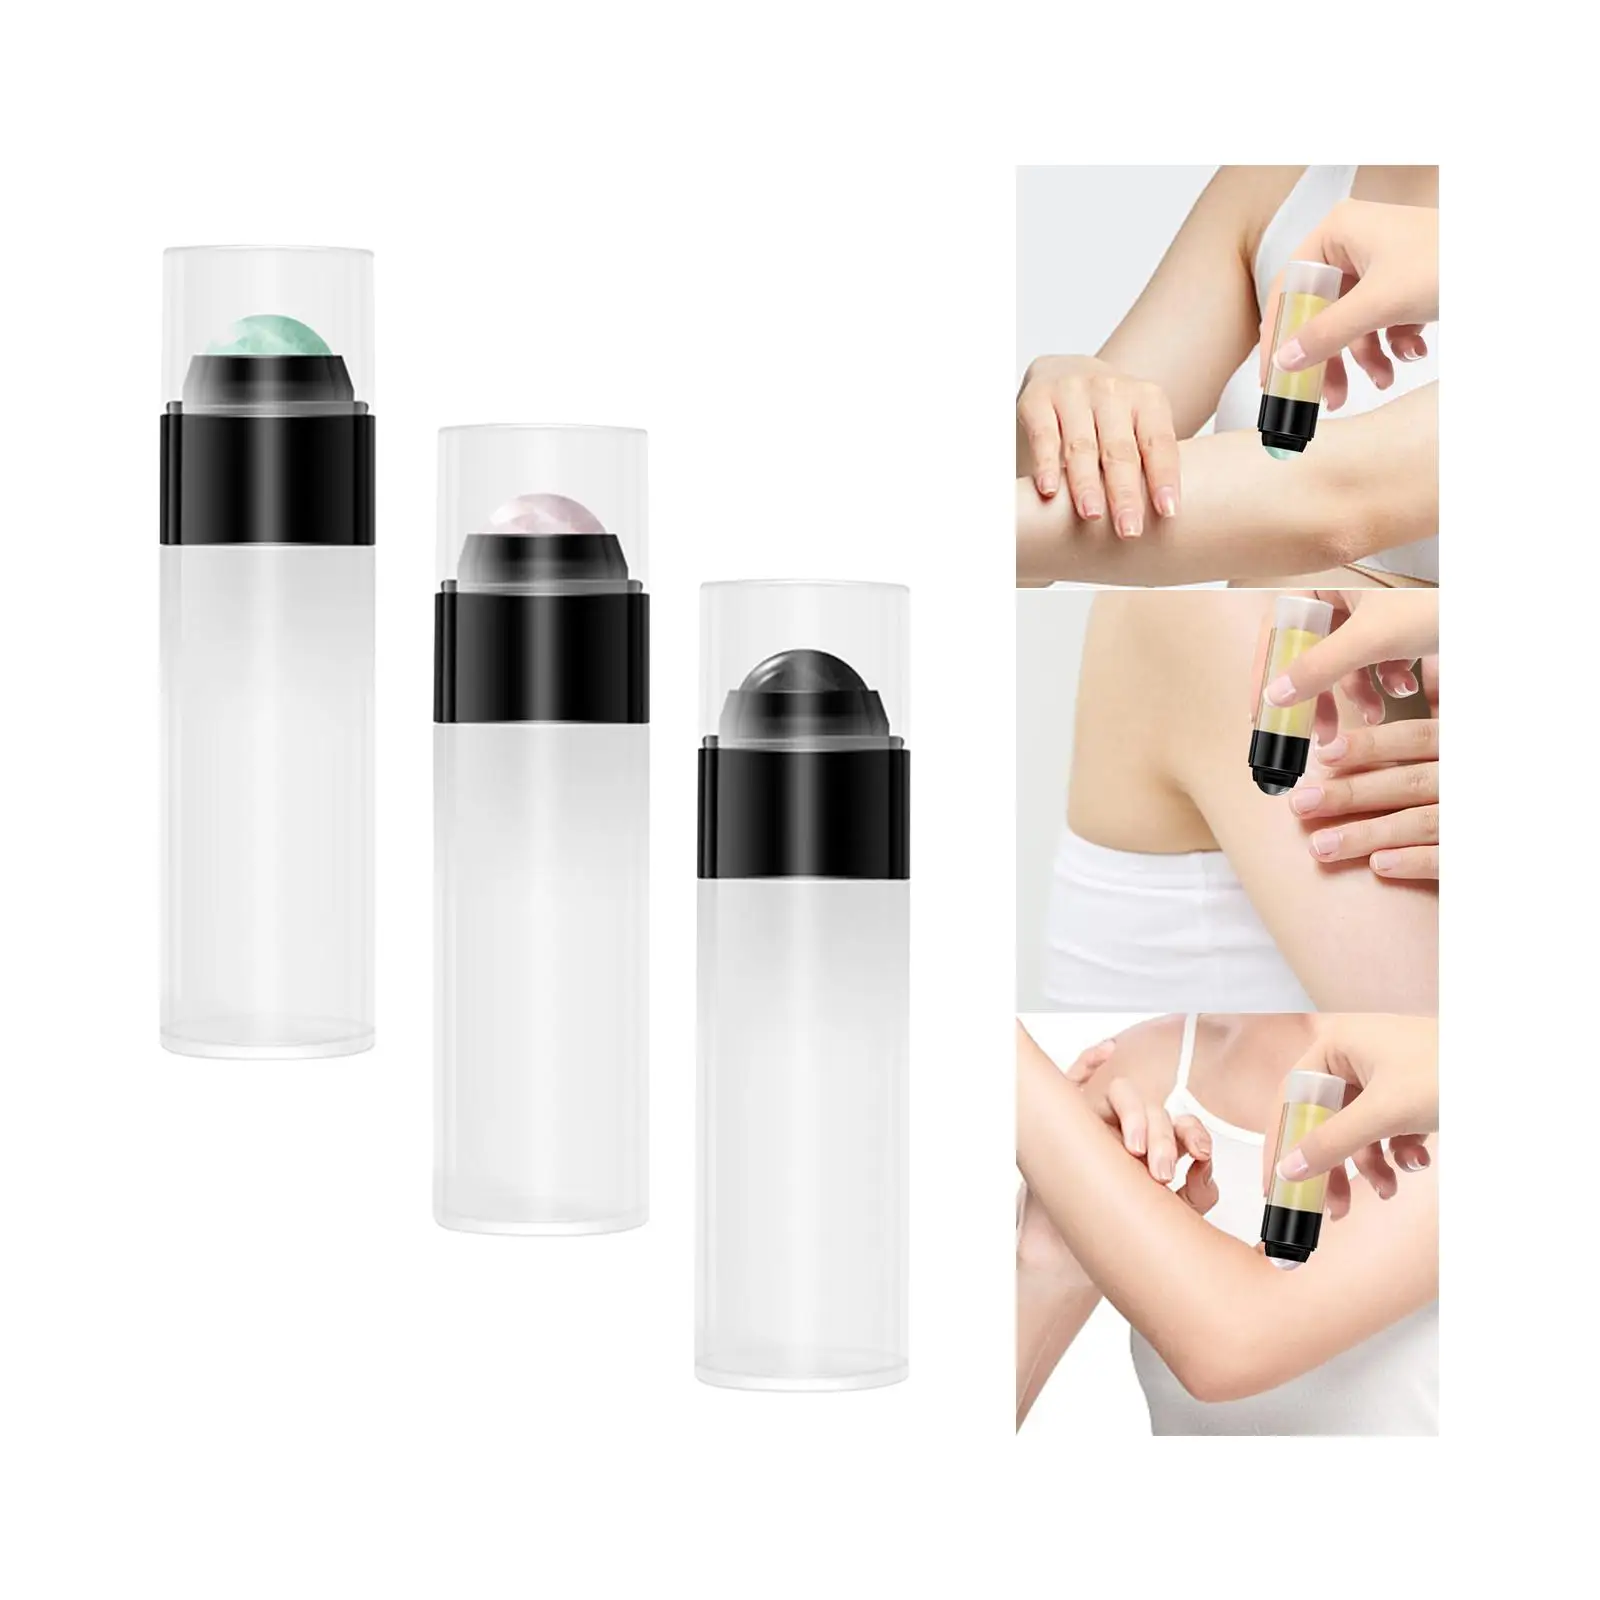 Roll on Perfume Bottles 30ml with Stone Ball Portable Roller Bottles Essential Oil Container Roller Balls for Essential Oils